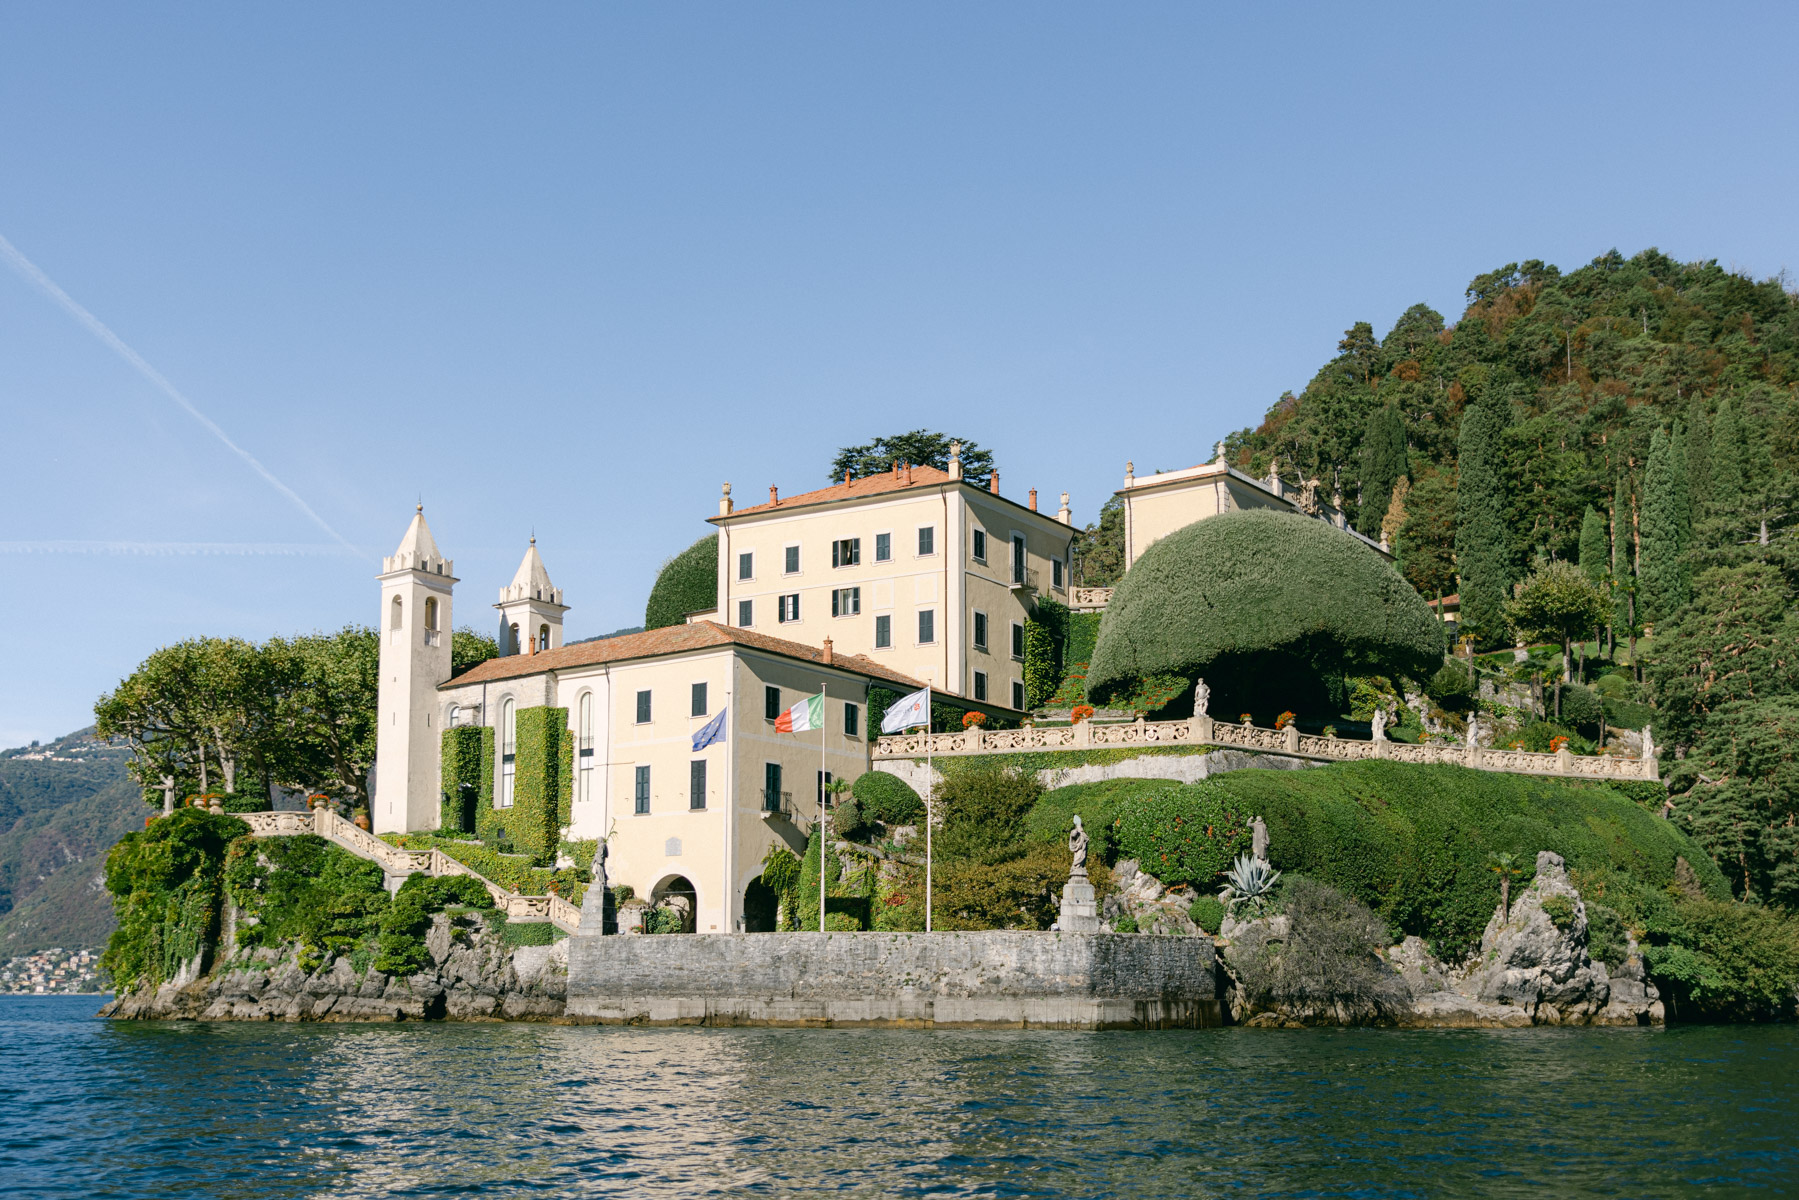 Villa Balbianello - The best venues to get married at Lake Como